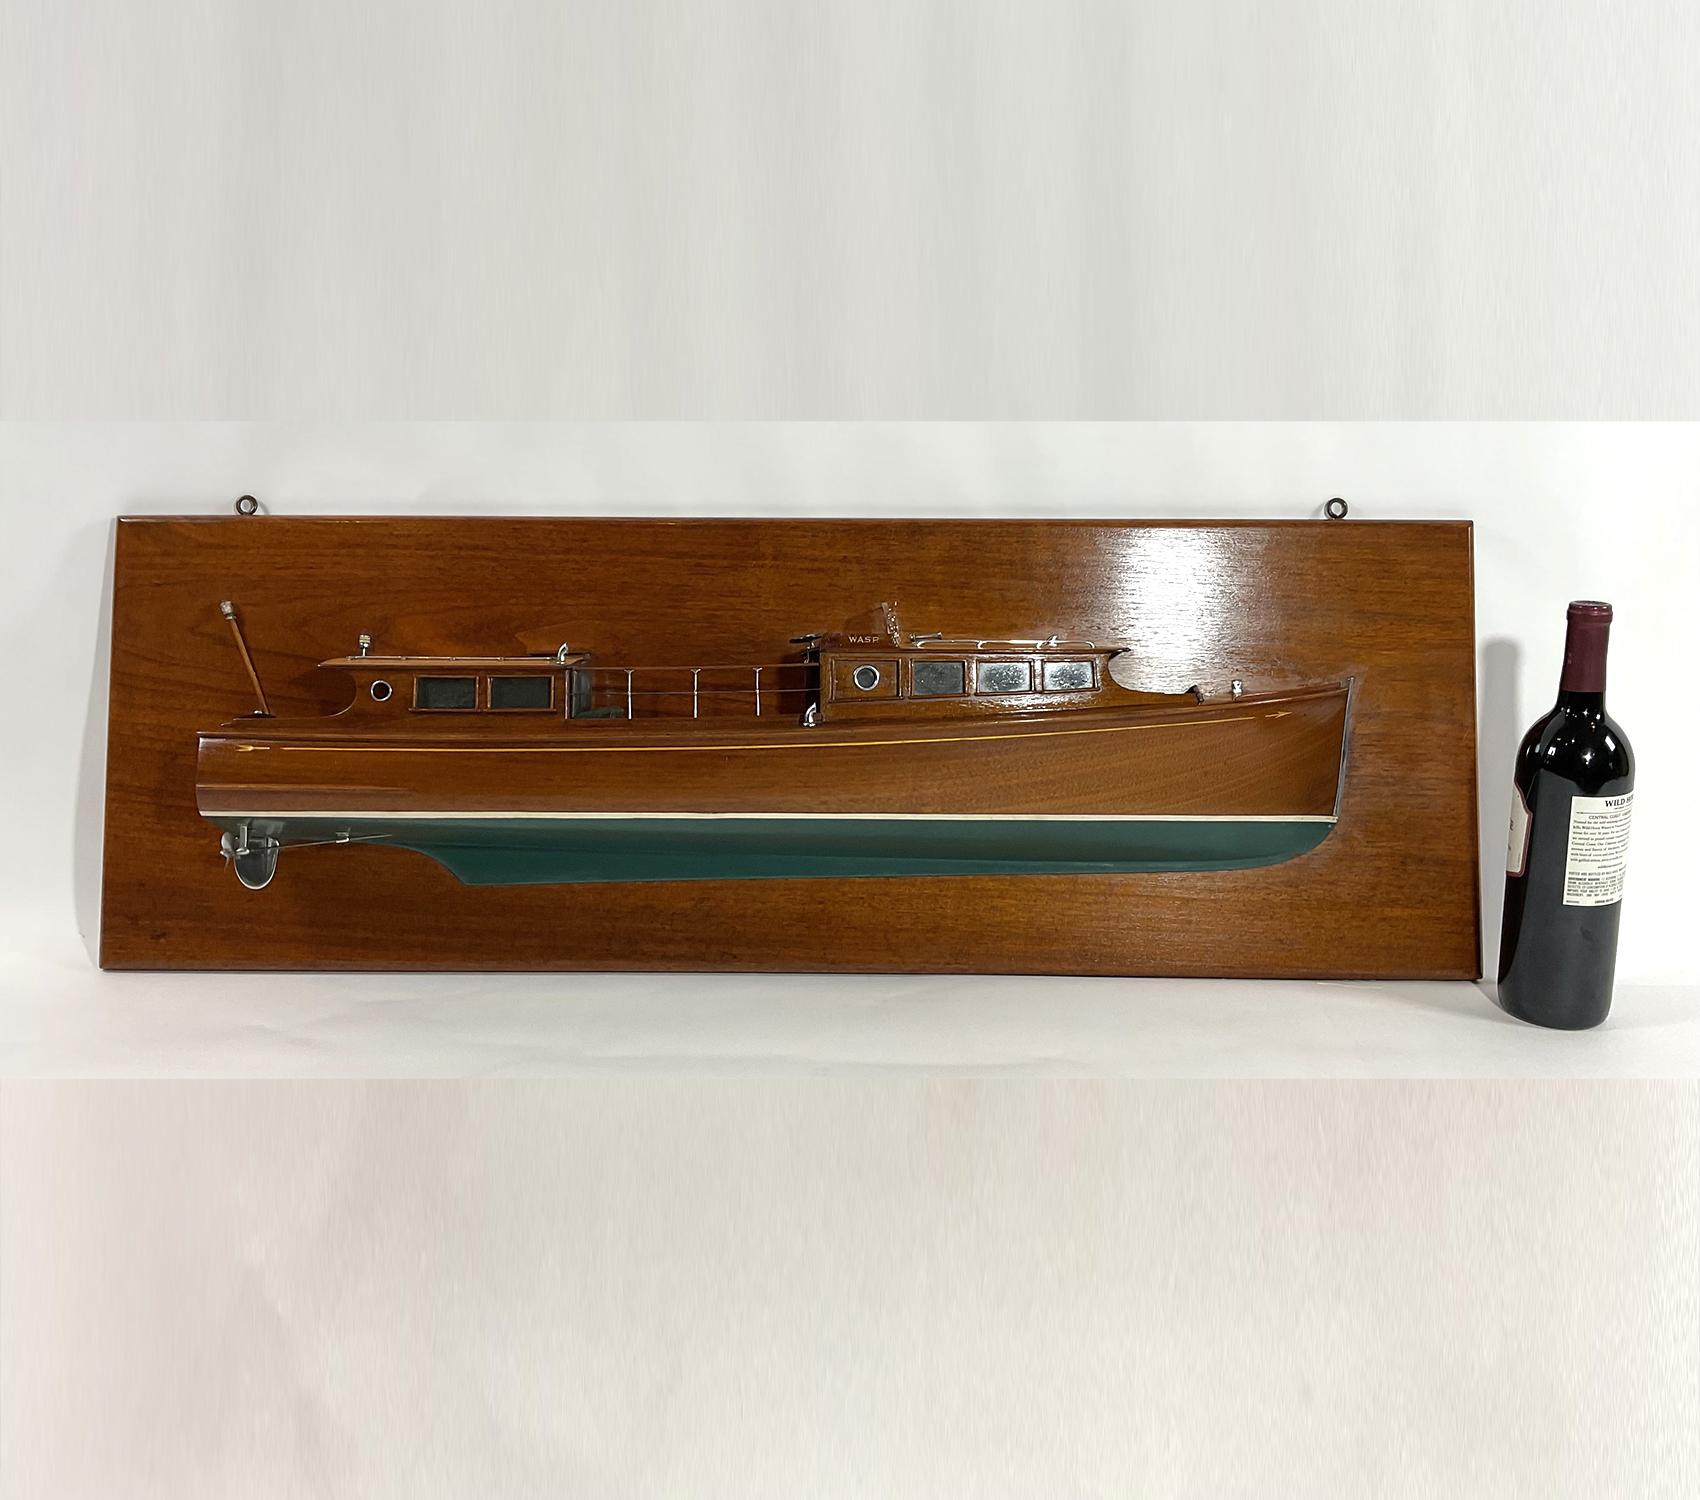 North American Architect's Half Model of Wrigley Yacht Wasp For Sale